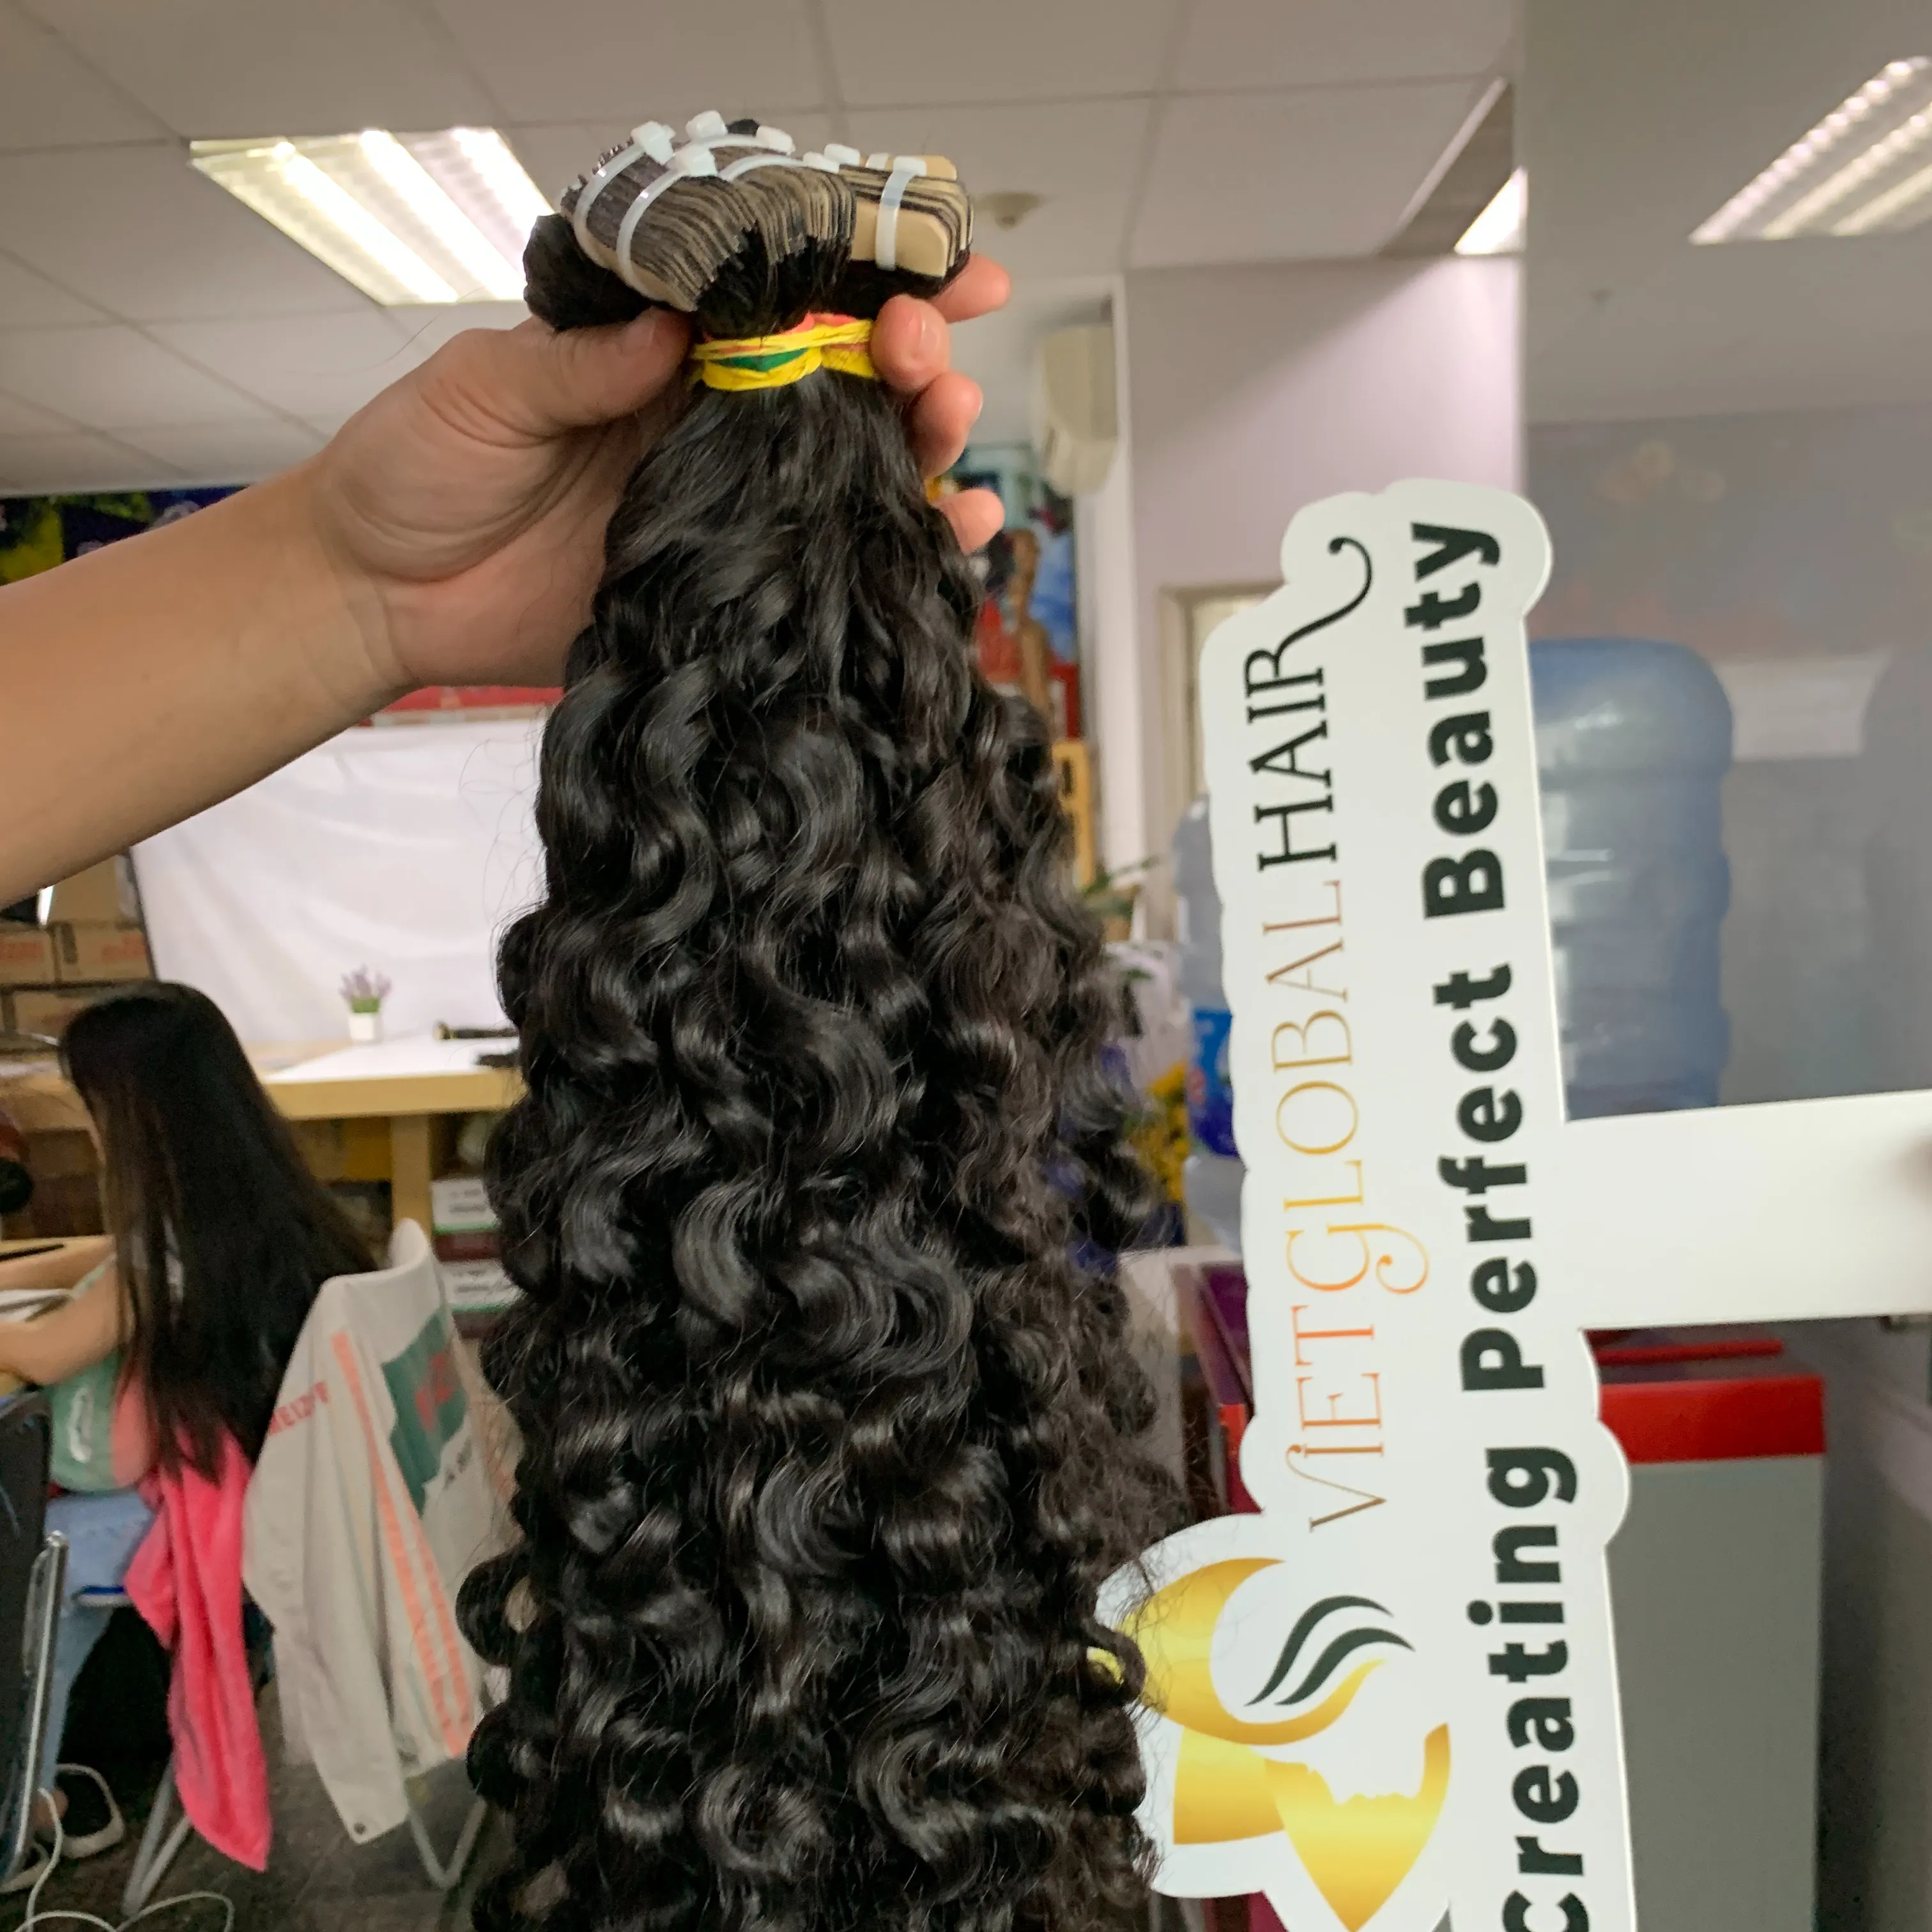 Burmese Curly Tape In Hair The Best Selling Product This Winter Hair Of All Sizes Colors Natural Hair From Vietnamese Girls